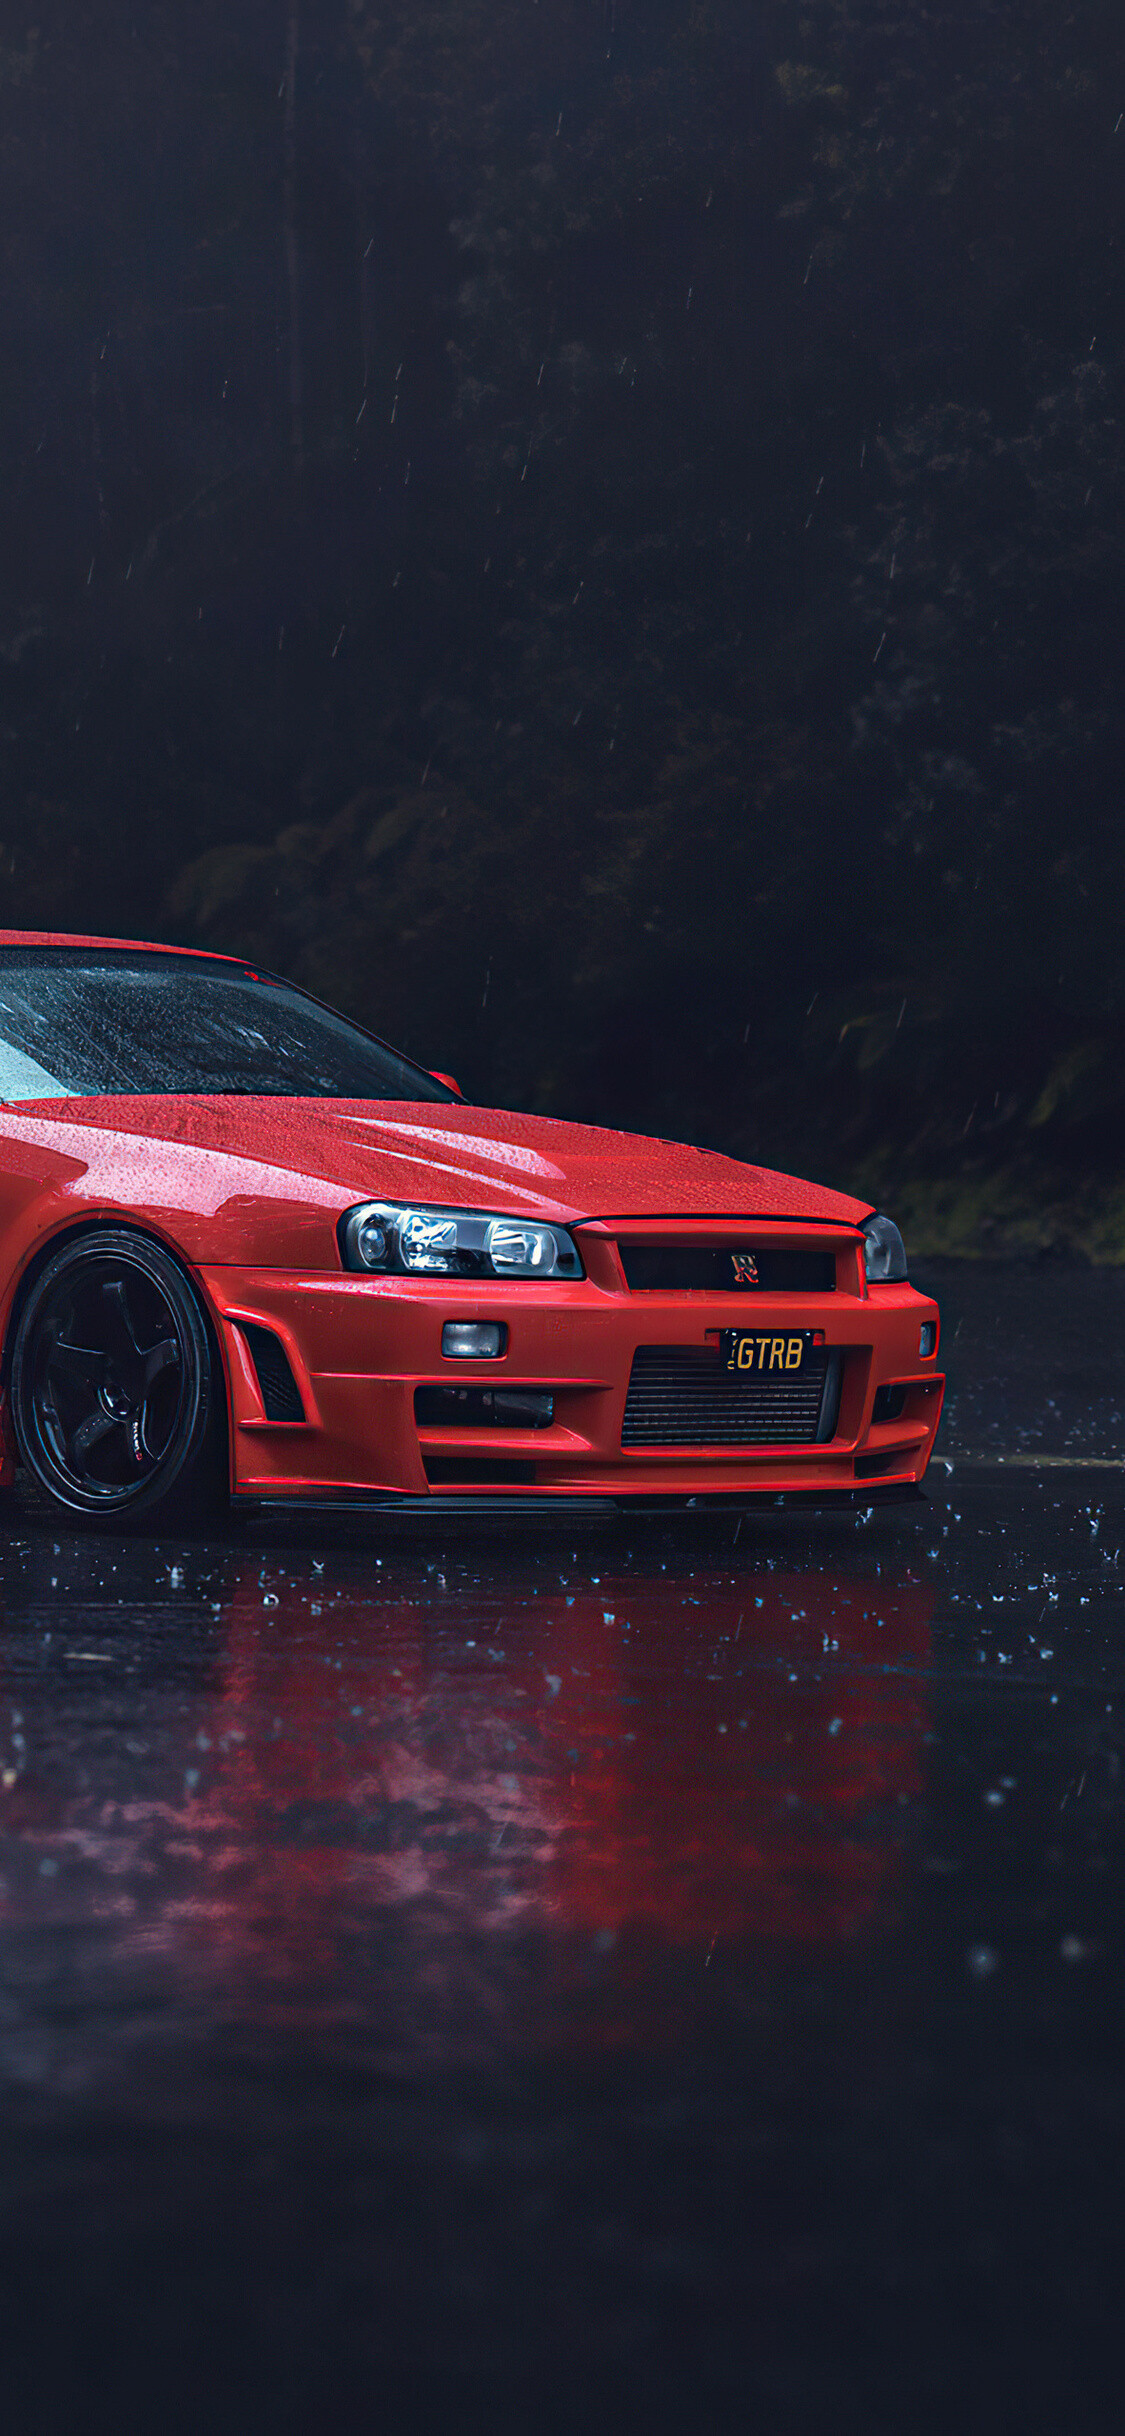 Nissan: Skyline, A brand of automobile originally produced by the Prince Motor Company starting in 1957. 1130x2440 HD Wallpaper.